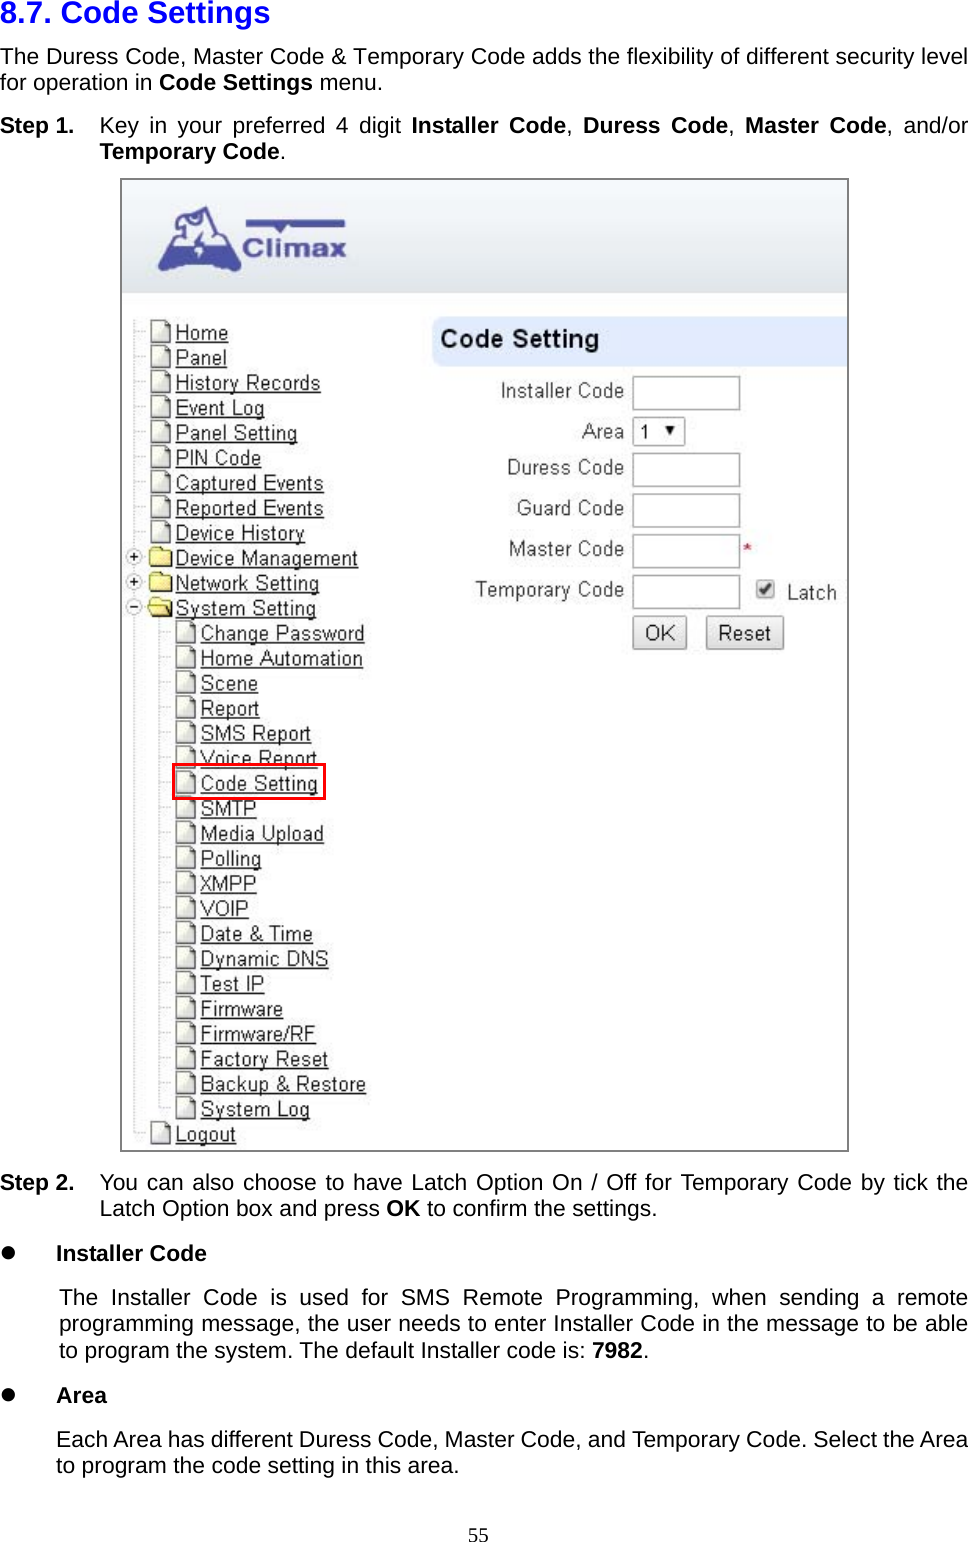  558.7. Code Settings   The Duress Code, Master Code &amp; Temporary Code adds the flexibility of different security level for operation in Code Settings menu. Step 1.  Key in your preferred 4 digit Installer Code,  Duress Code,  Master Code, and/or Temporary Code.  Step 2.  You can also choose to have Latch Option On / Off for Temporary Code by tick the Latch Option box and press OK to confirm the settings.    Installer Code The Installer Code is used for SMS Remote Programming, when sending a remote programming message, the user needs to enter Installer Code in the message to be able to program the system. The default Installer code is: 7982.  Area Each Area has different Duress Code, Master Code, and Temporary Code. Select the Area to program the code setting in this area. 